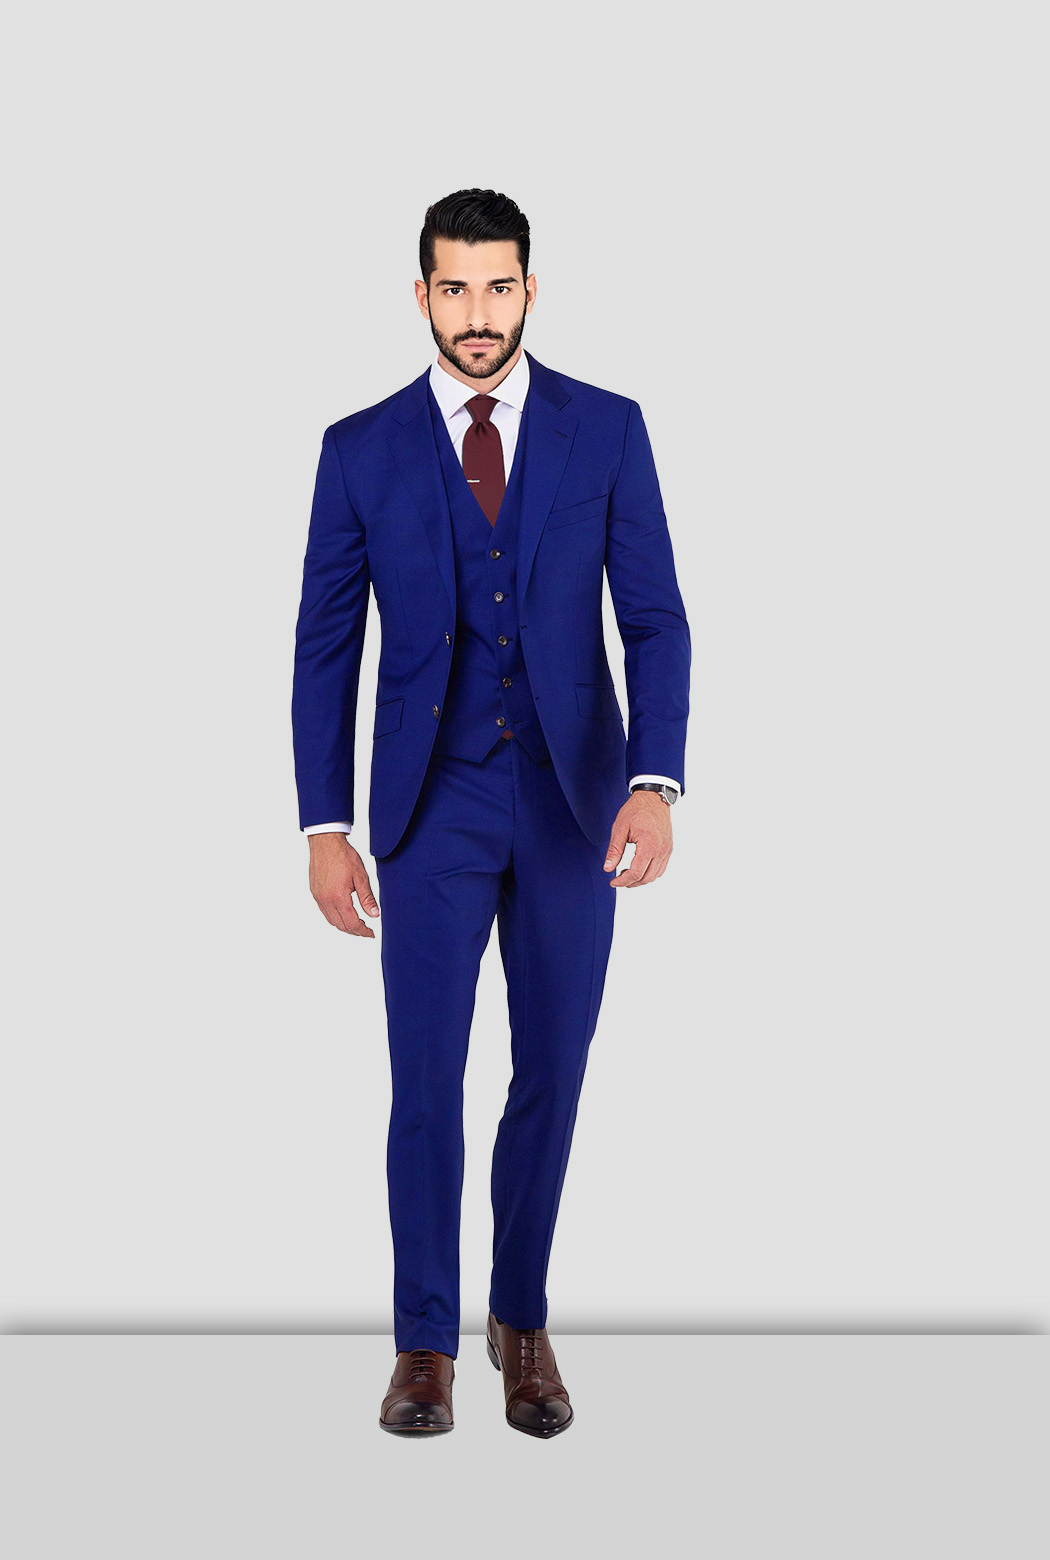 Frac / Tight - Complete man frac suits Tailored Frac / Tight